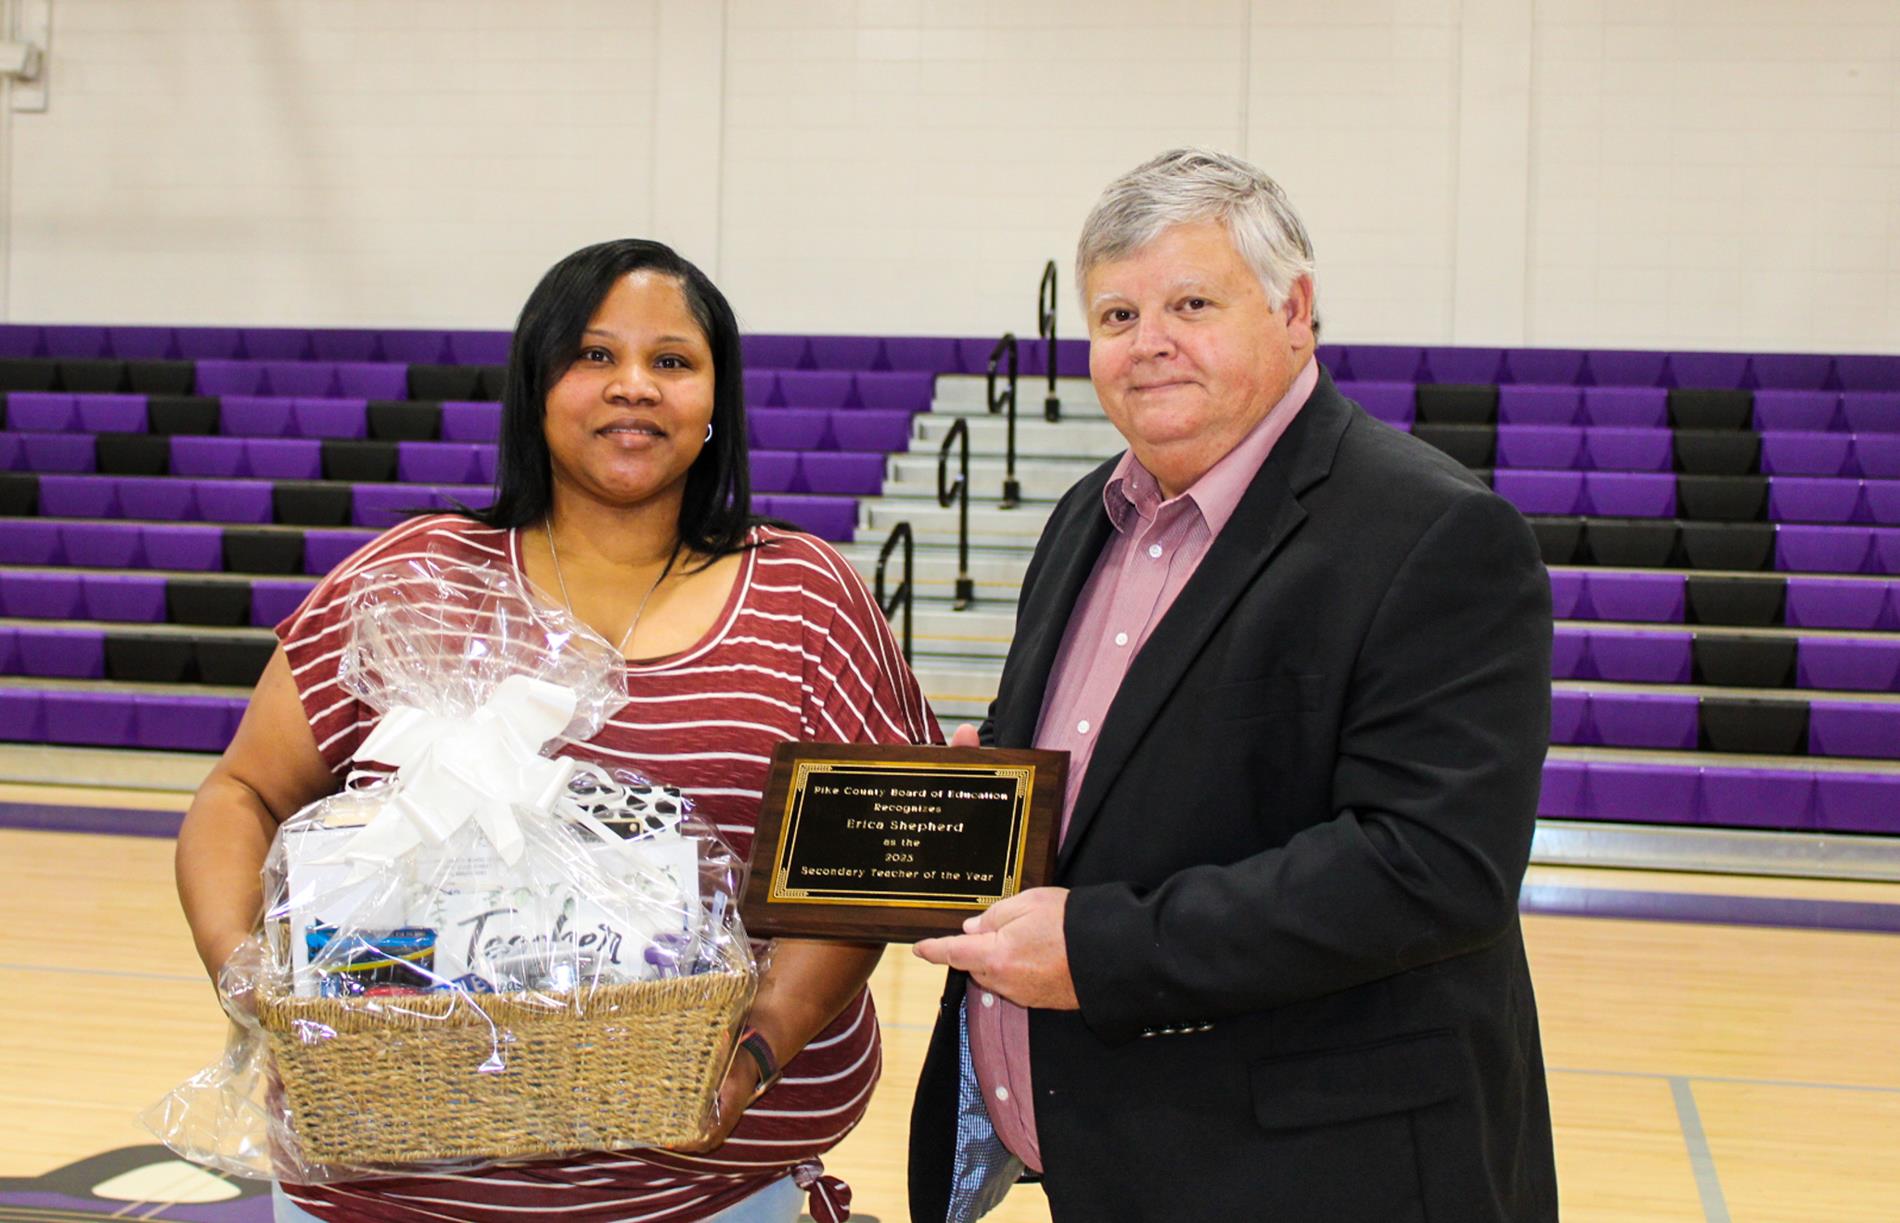 Ms. Shepherd was named Overall Secondary Teacher of the Year.